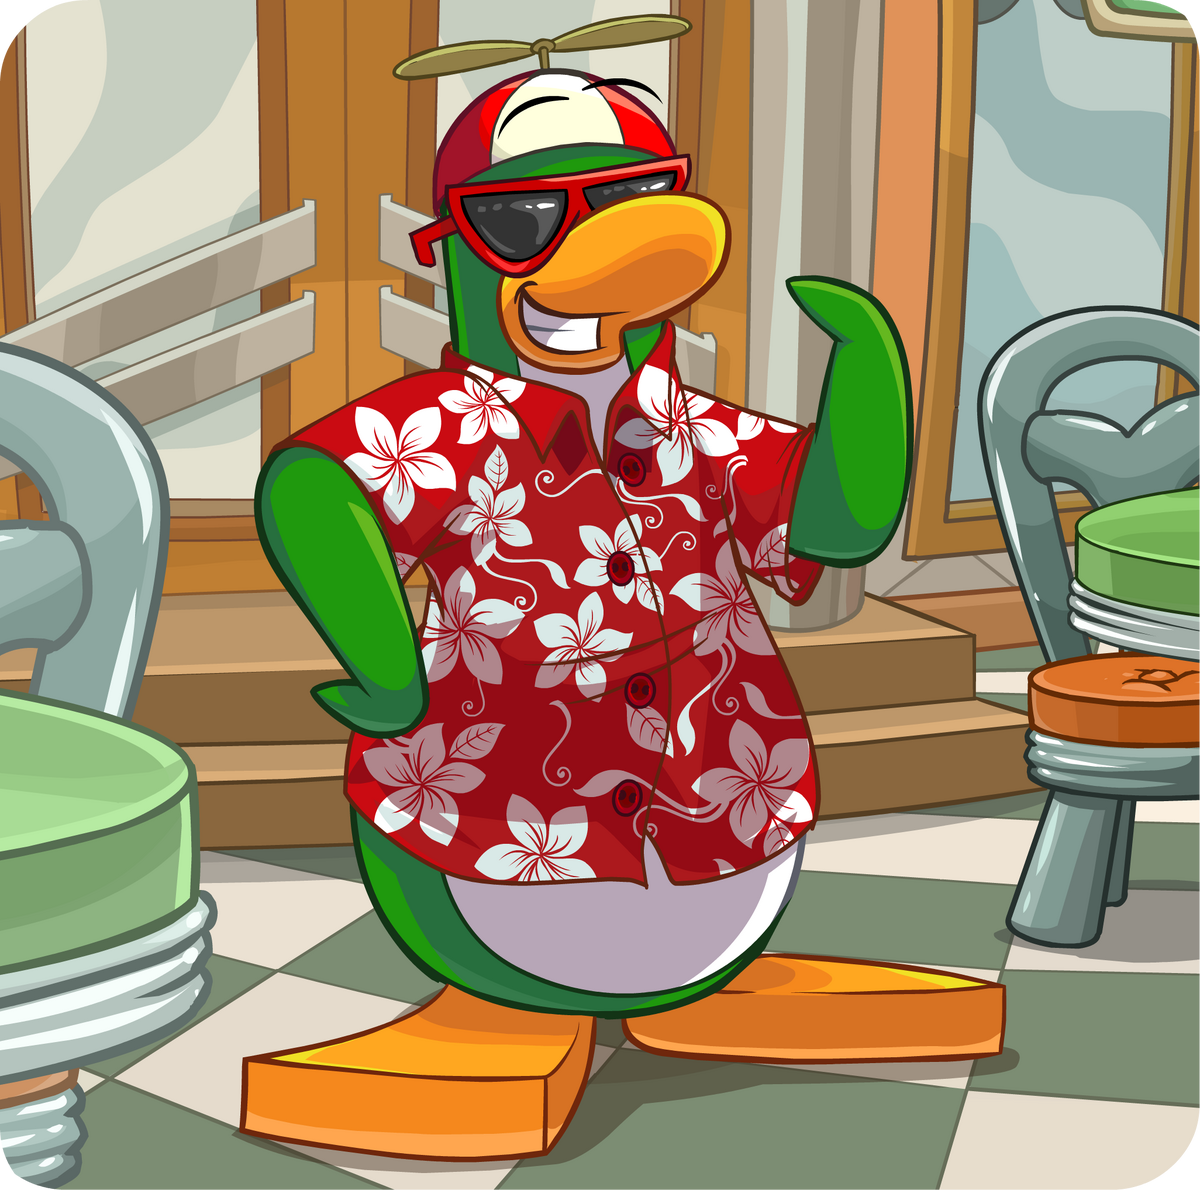 Club Penguin Minigames are GOATed for real #clubpenguin #newclubpengui